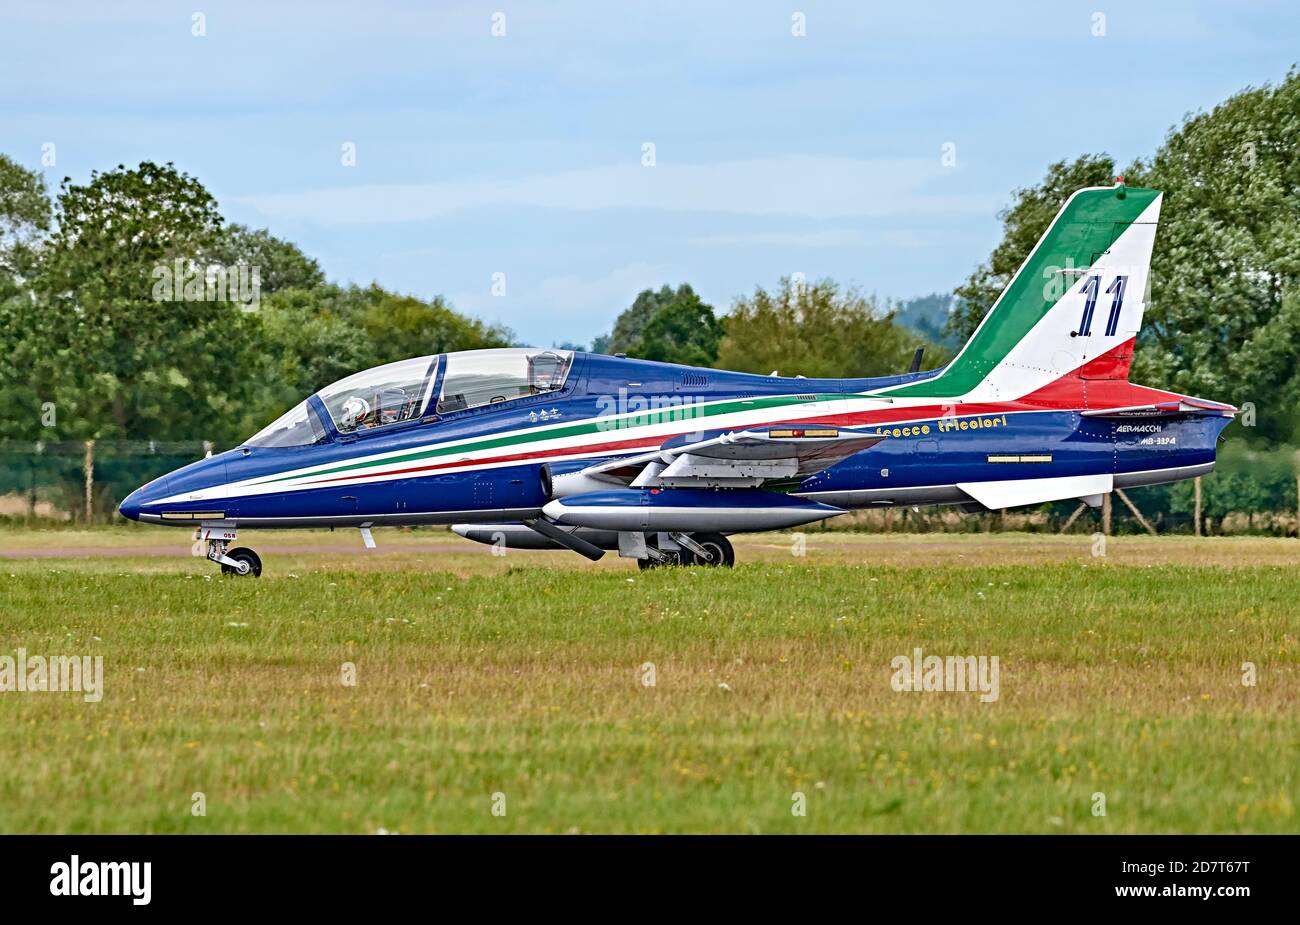 Aermacchi MB-339 of the Frecce Tricolori Italian Air Force aerobatic display team, taxiing after landing at RIAT 2019 Stock Photo